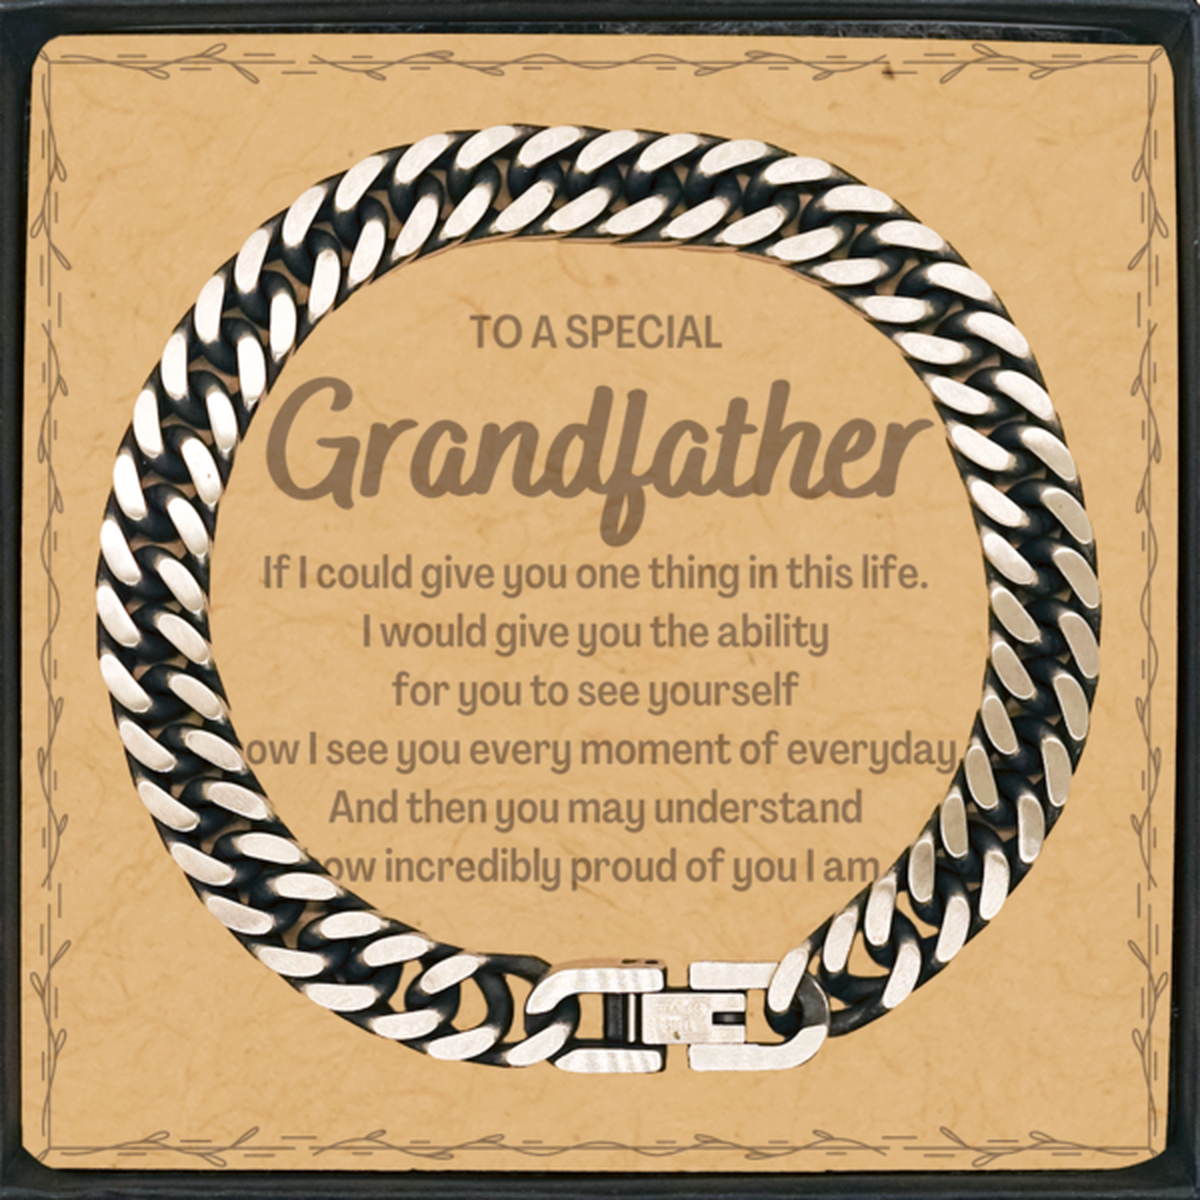 To My Grandfather Cuban Link Chain Bracelet, Gifts For Grandfather Message Card, Inspirational Gifts for Christmas Birthday, Epic Gifts for Grandfather To A Special Grandfather how incredibly proud of you I am